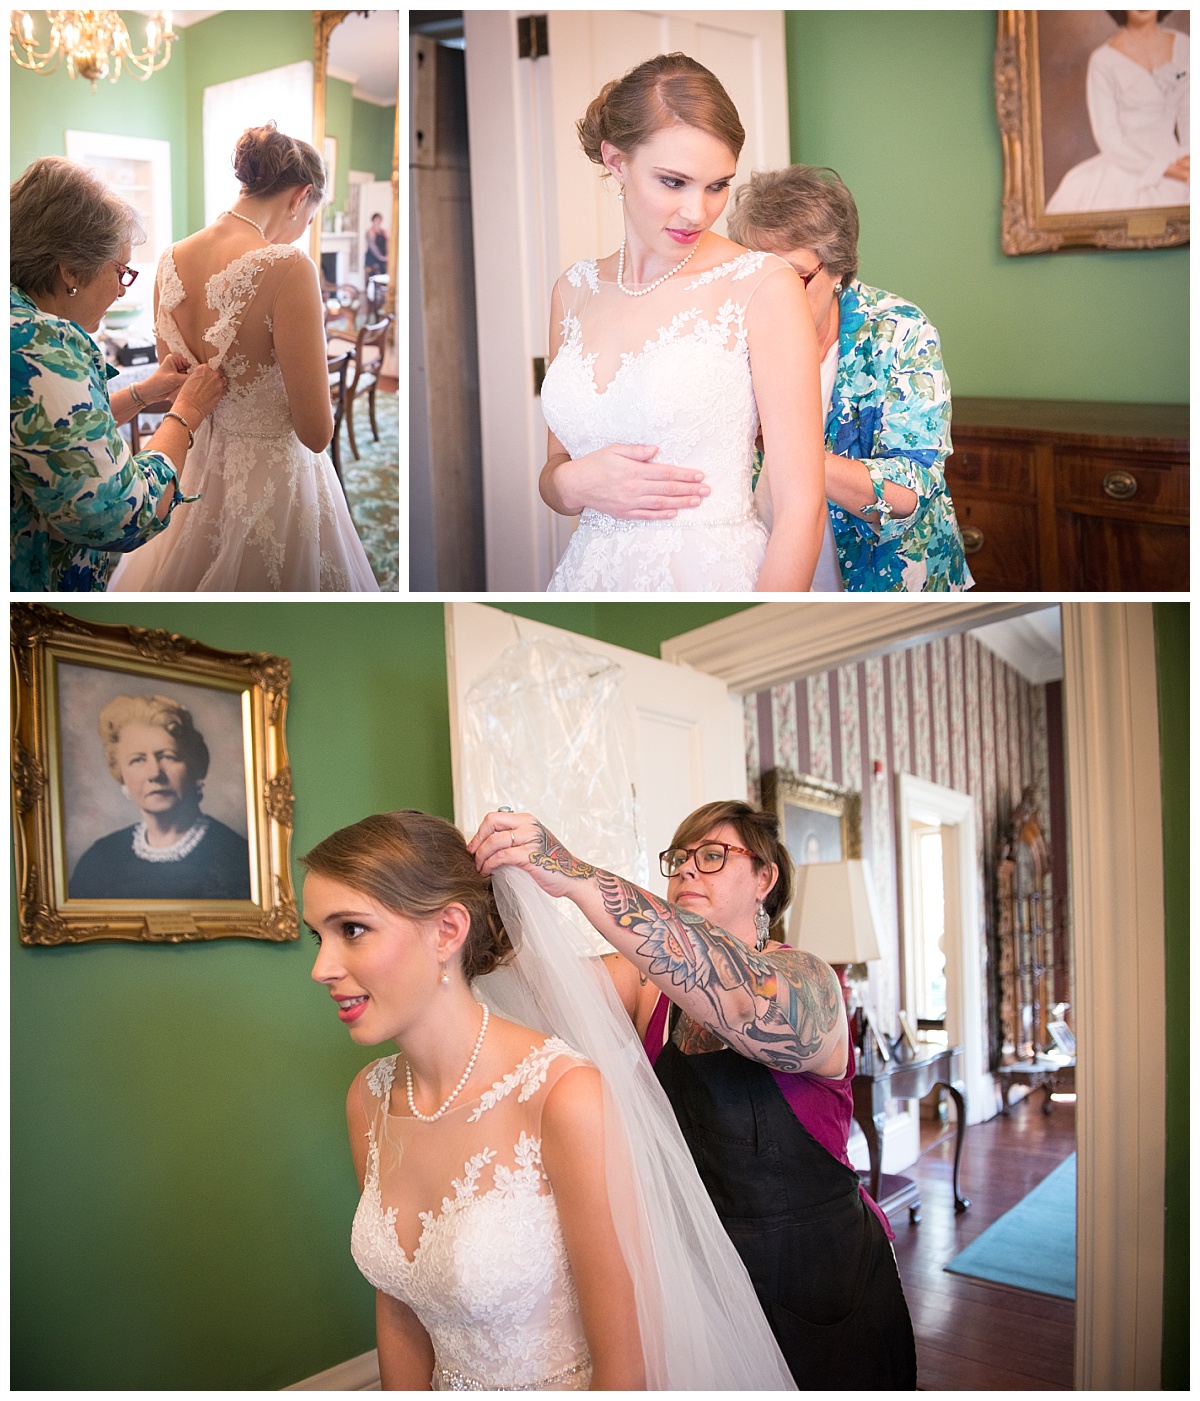 Bridal portraits at SC Governor's mansion grounds